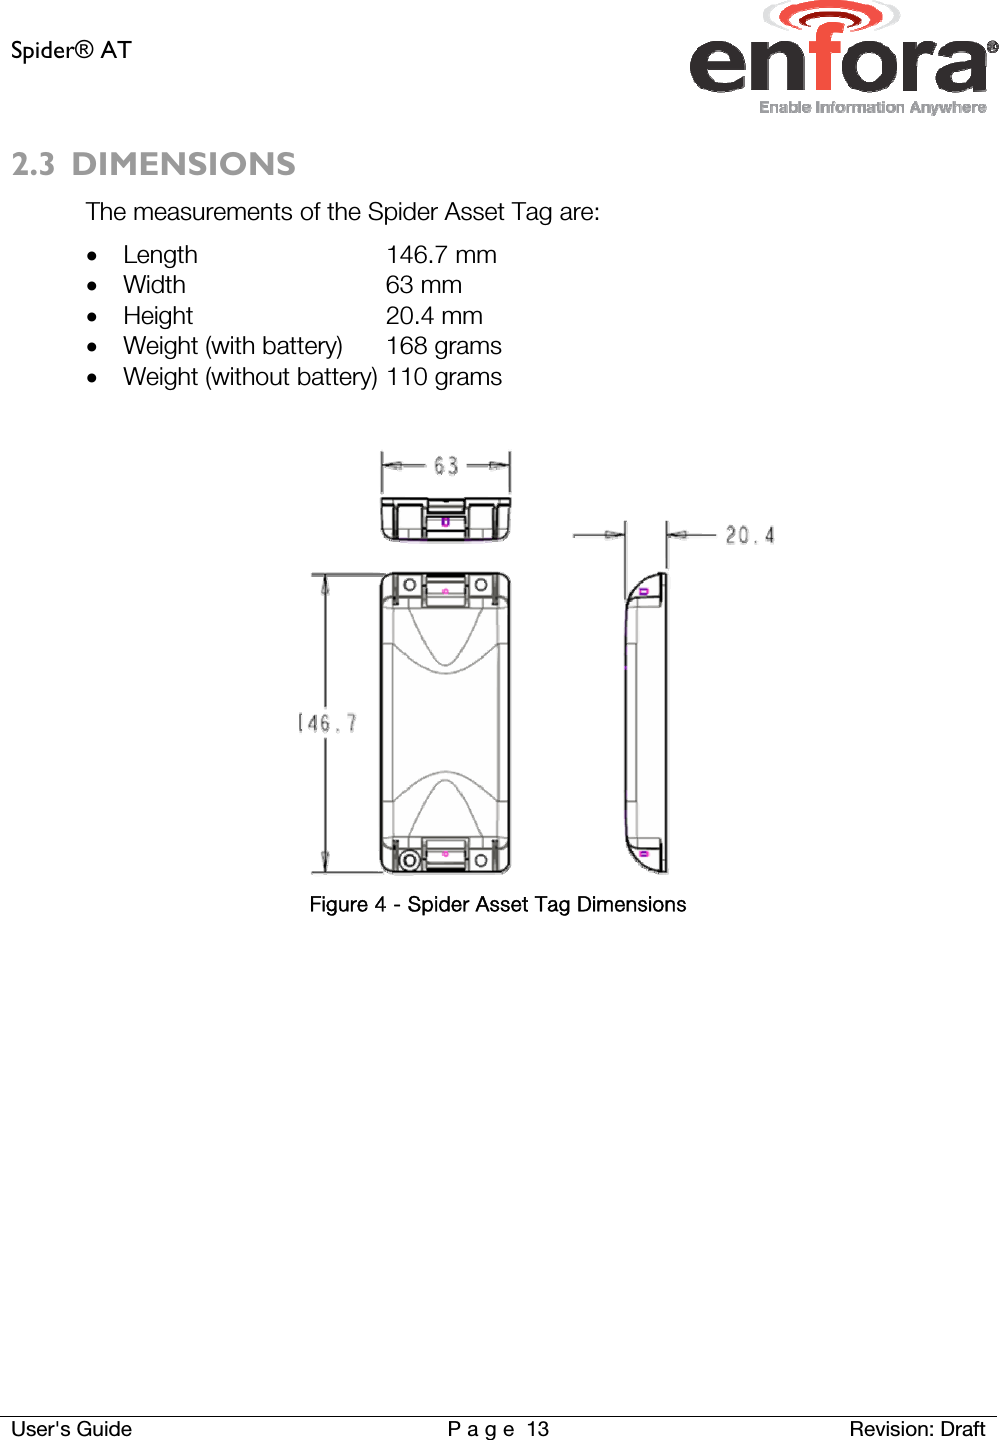 Spider® AT     User&apos;s Guide  P a g e 13 Revision: Draft 2.3 DIMENSIONS The measurements of the Spider Asset Tag are:  Length   146.7 mm  Width   63 mm  Height   20.4 mm  Weight (with battery)  168 grams  Weight (without battery) 110 grams   Figure 4 - Spider Asset Tag Dimensions   